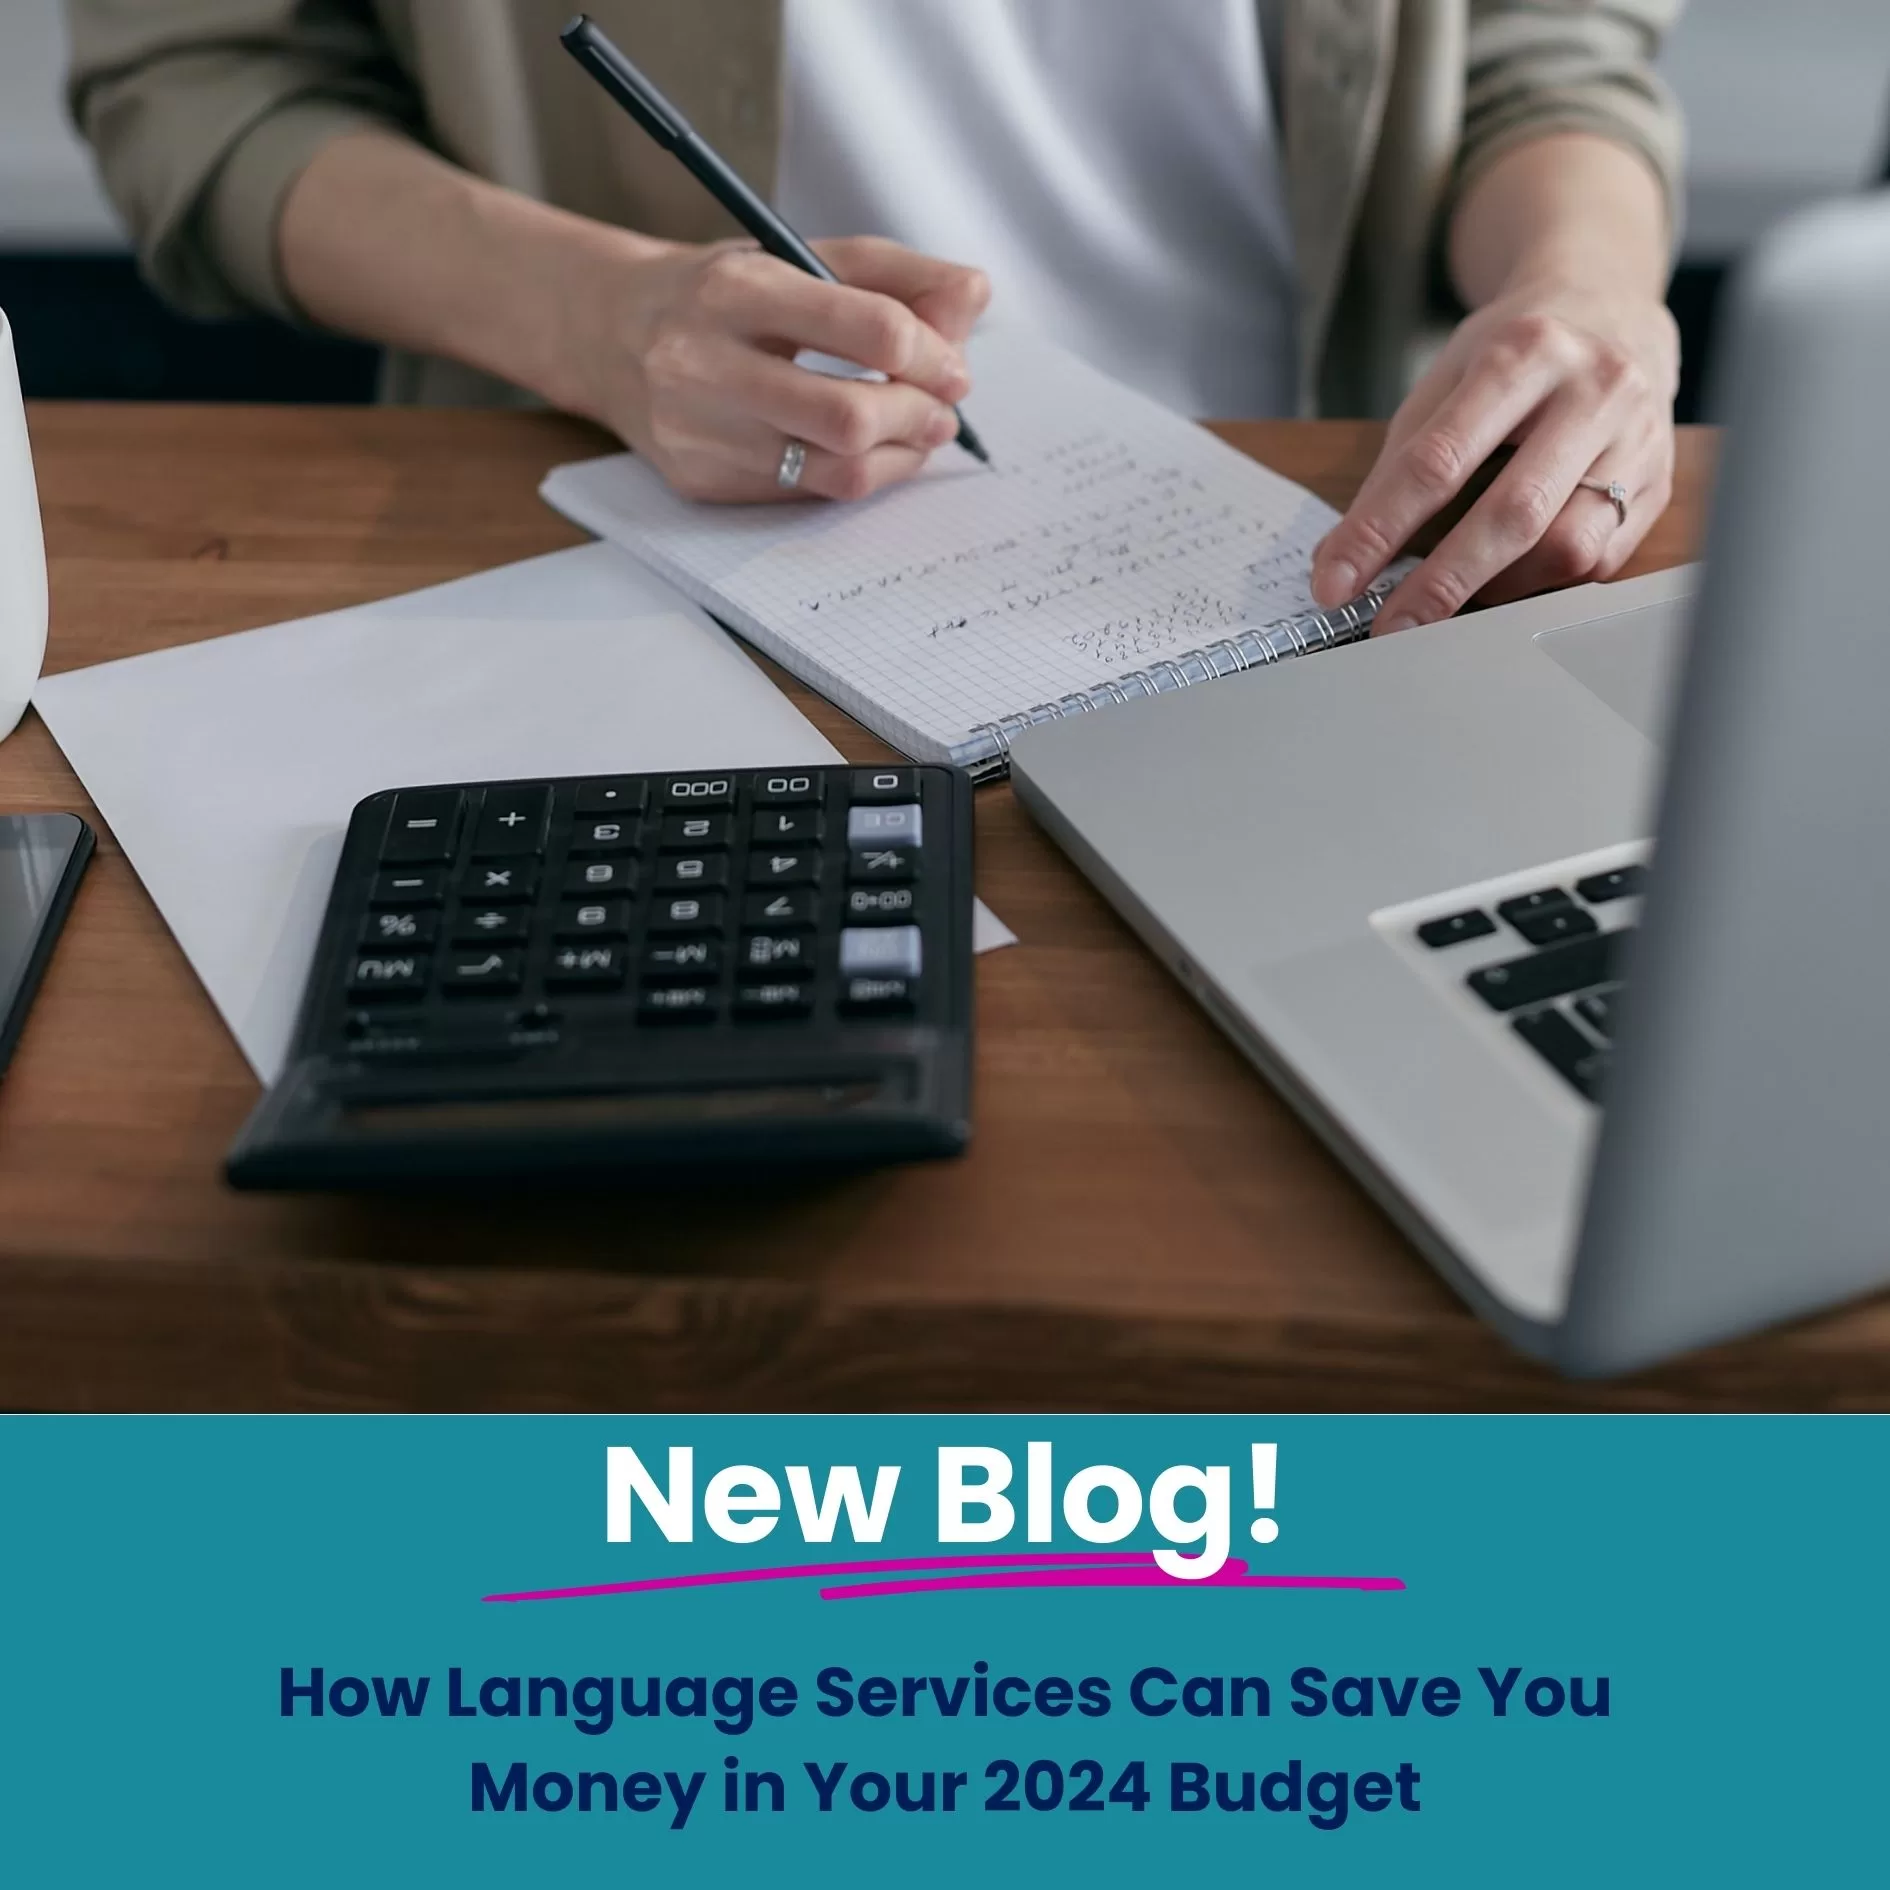 How Language Services Can Save You Money In 2024